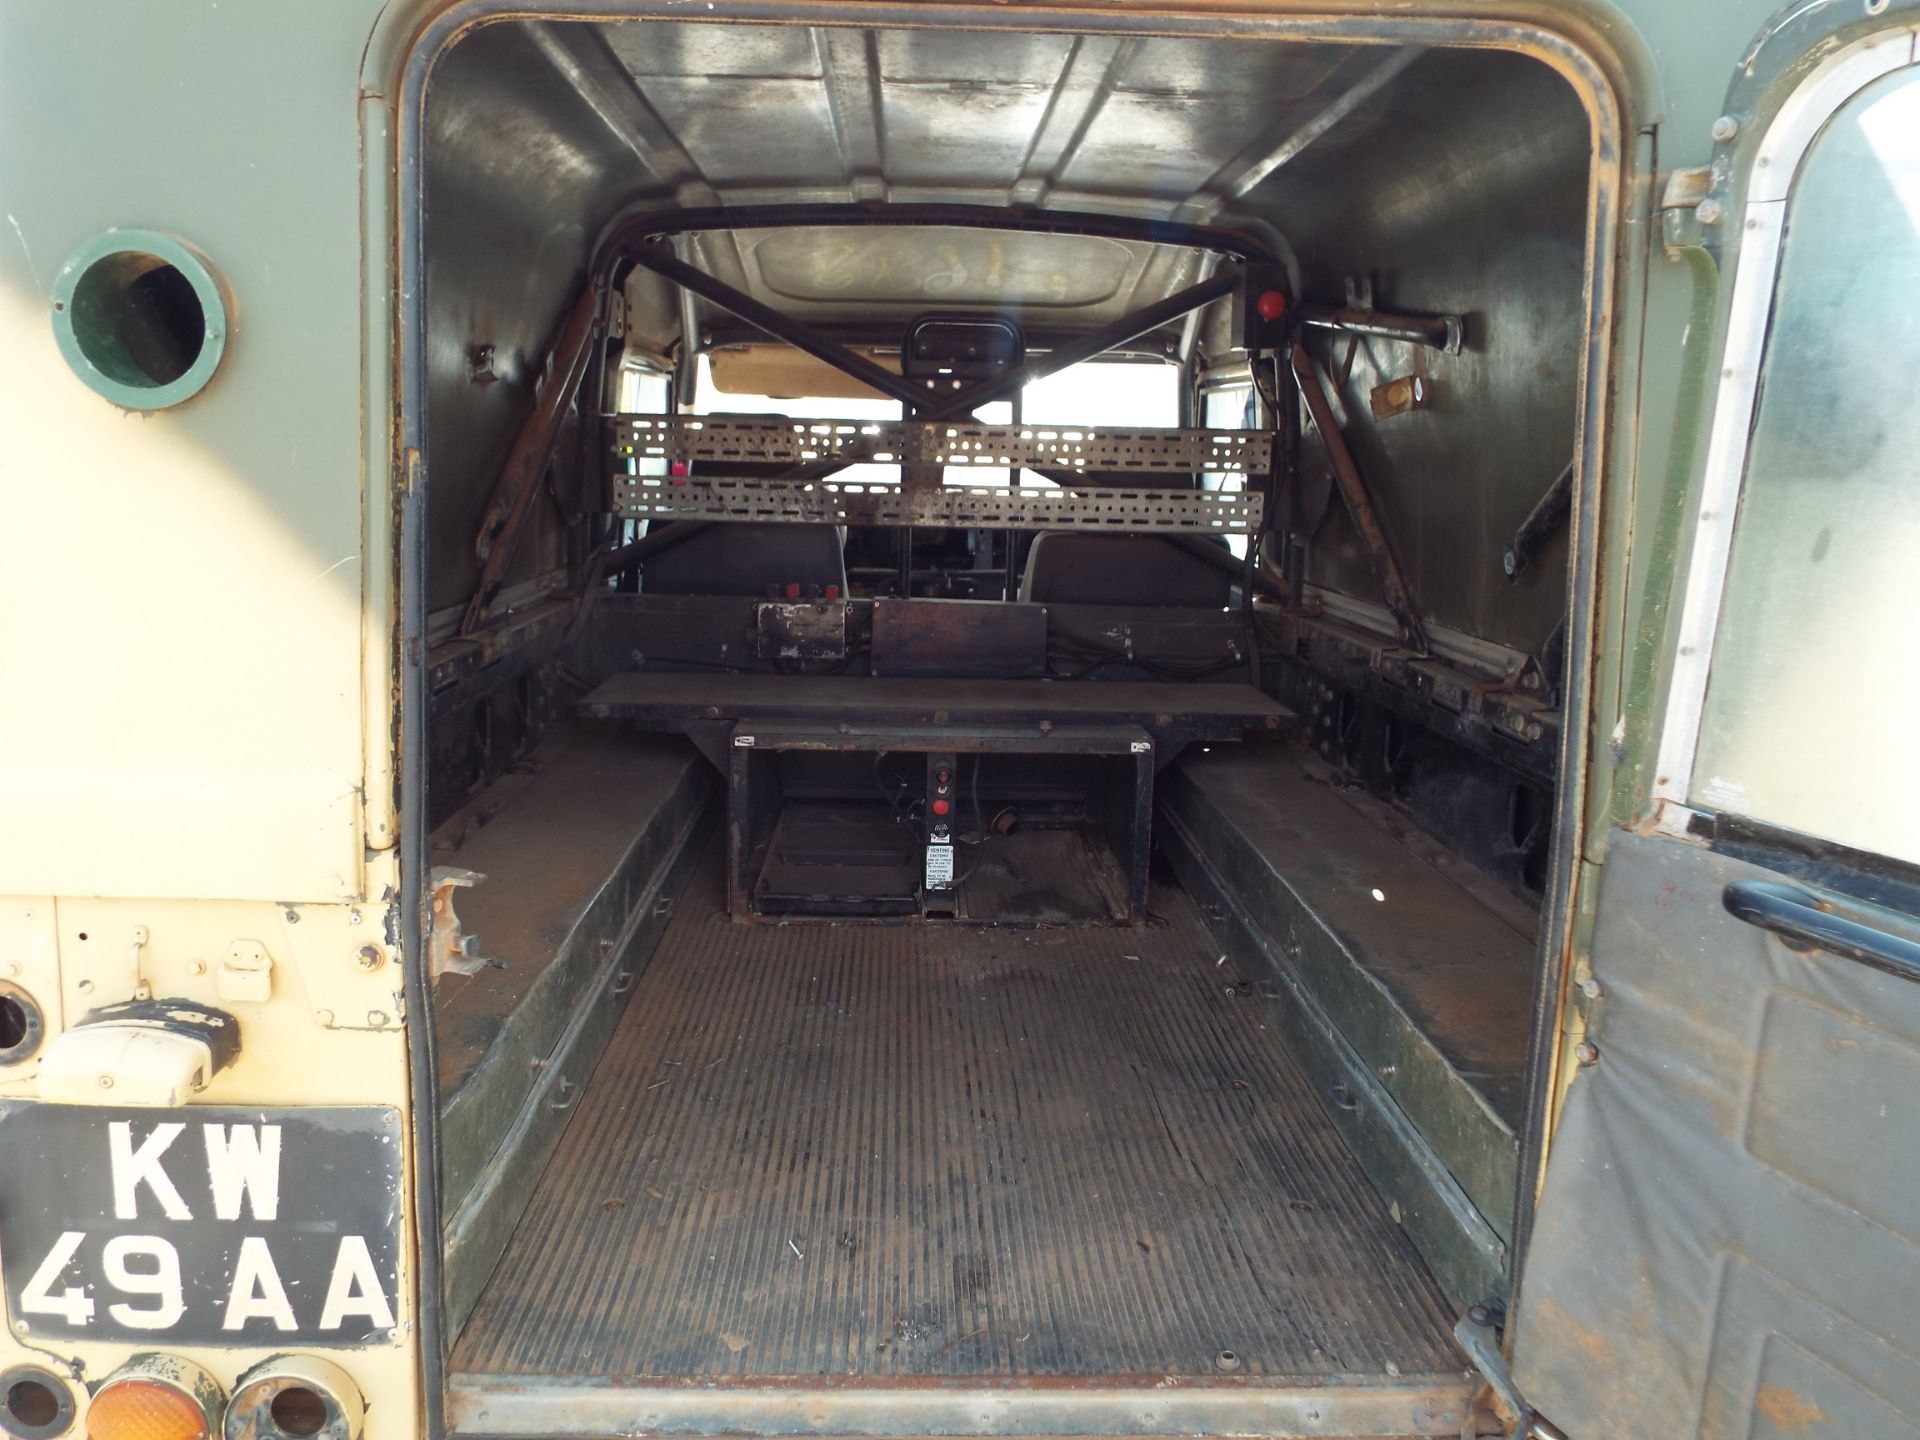 Military Specification LHD Land Rover Wolf 110 Hard Top - Image 12 of 20